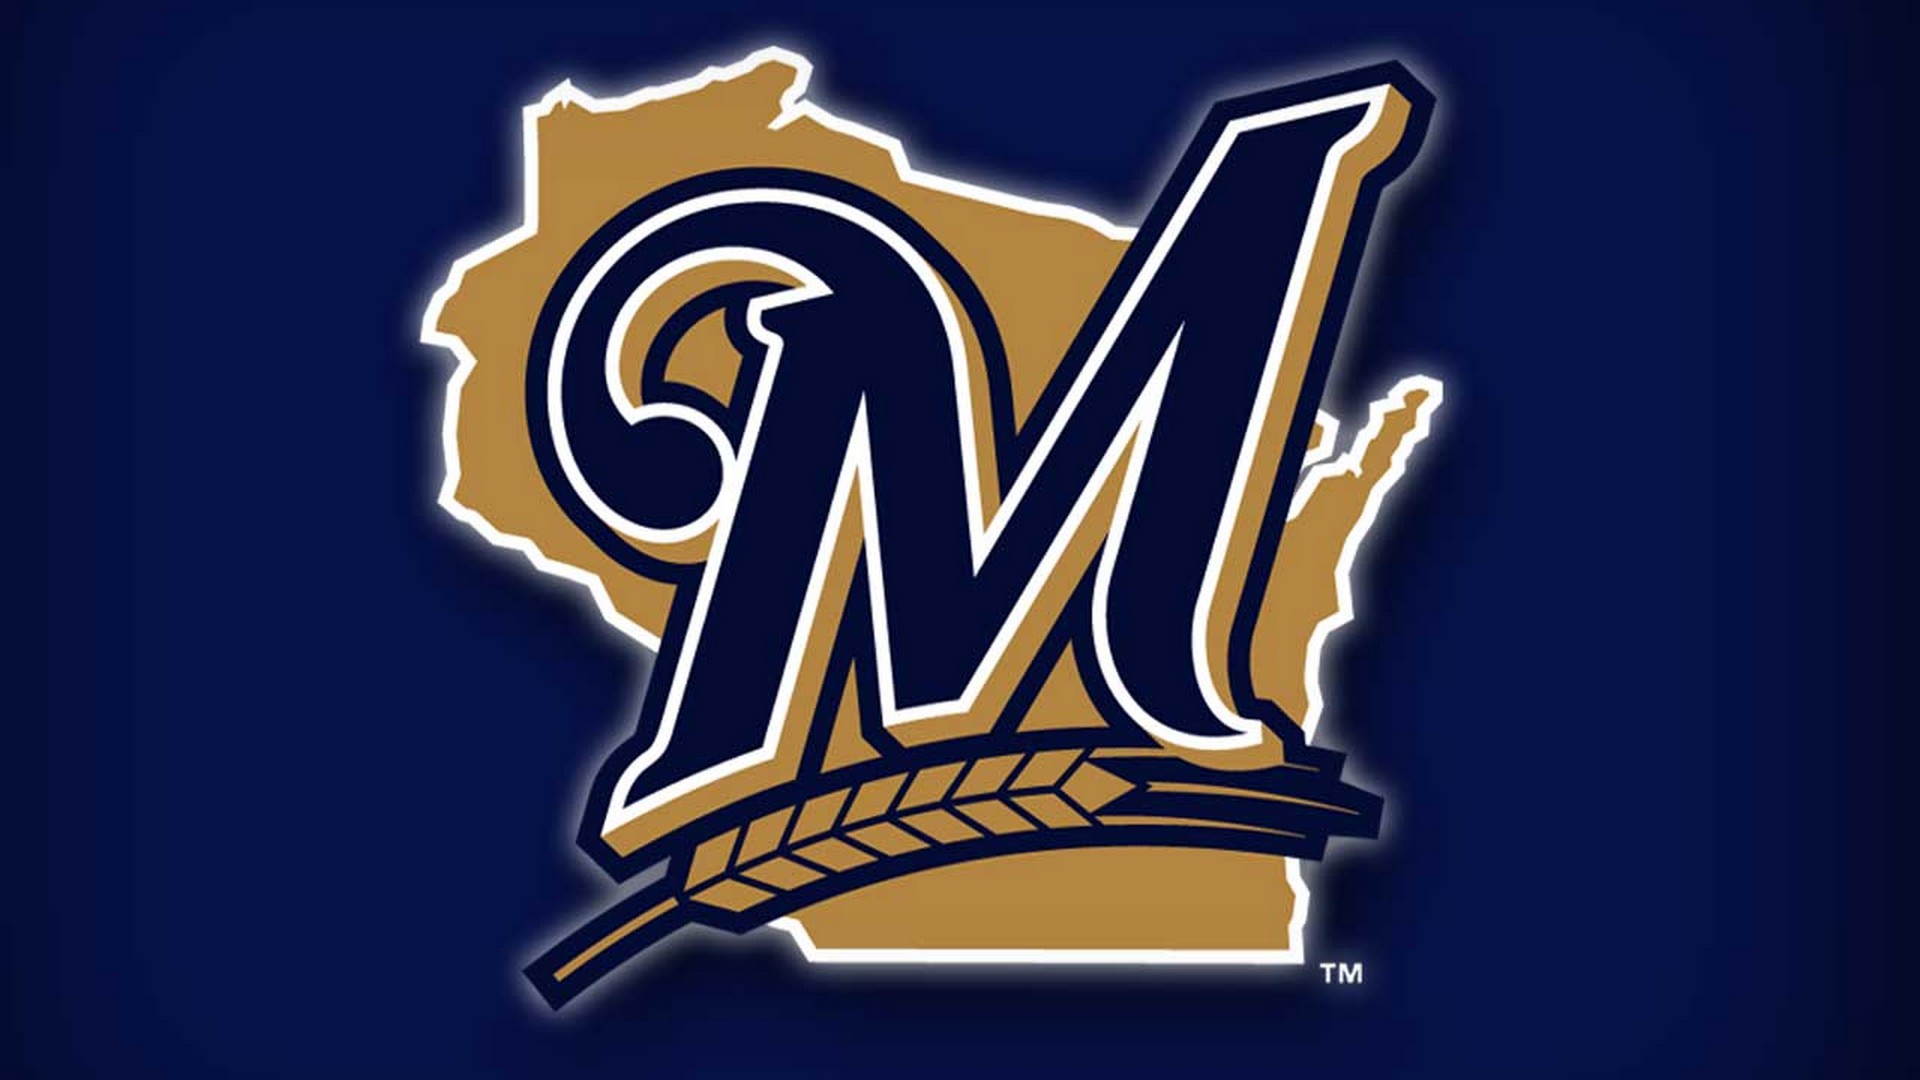 Milwaukee Brewers MLB Wallpaper HD With high-resolution 1920X1080 pixel. You can use this wallpaper for Mac Desktop Wallpaper, Laptop Screensavers, Android Wallpapers, Tablet or iPhone Home Screen and another mobile phone device